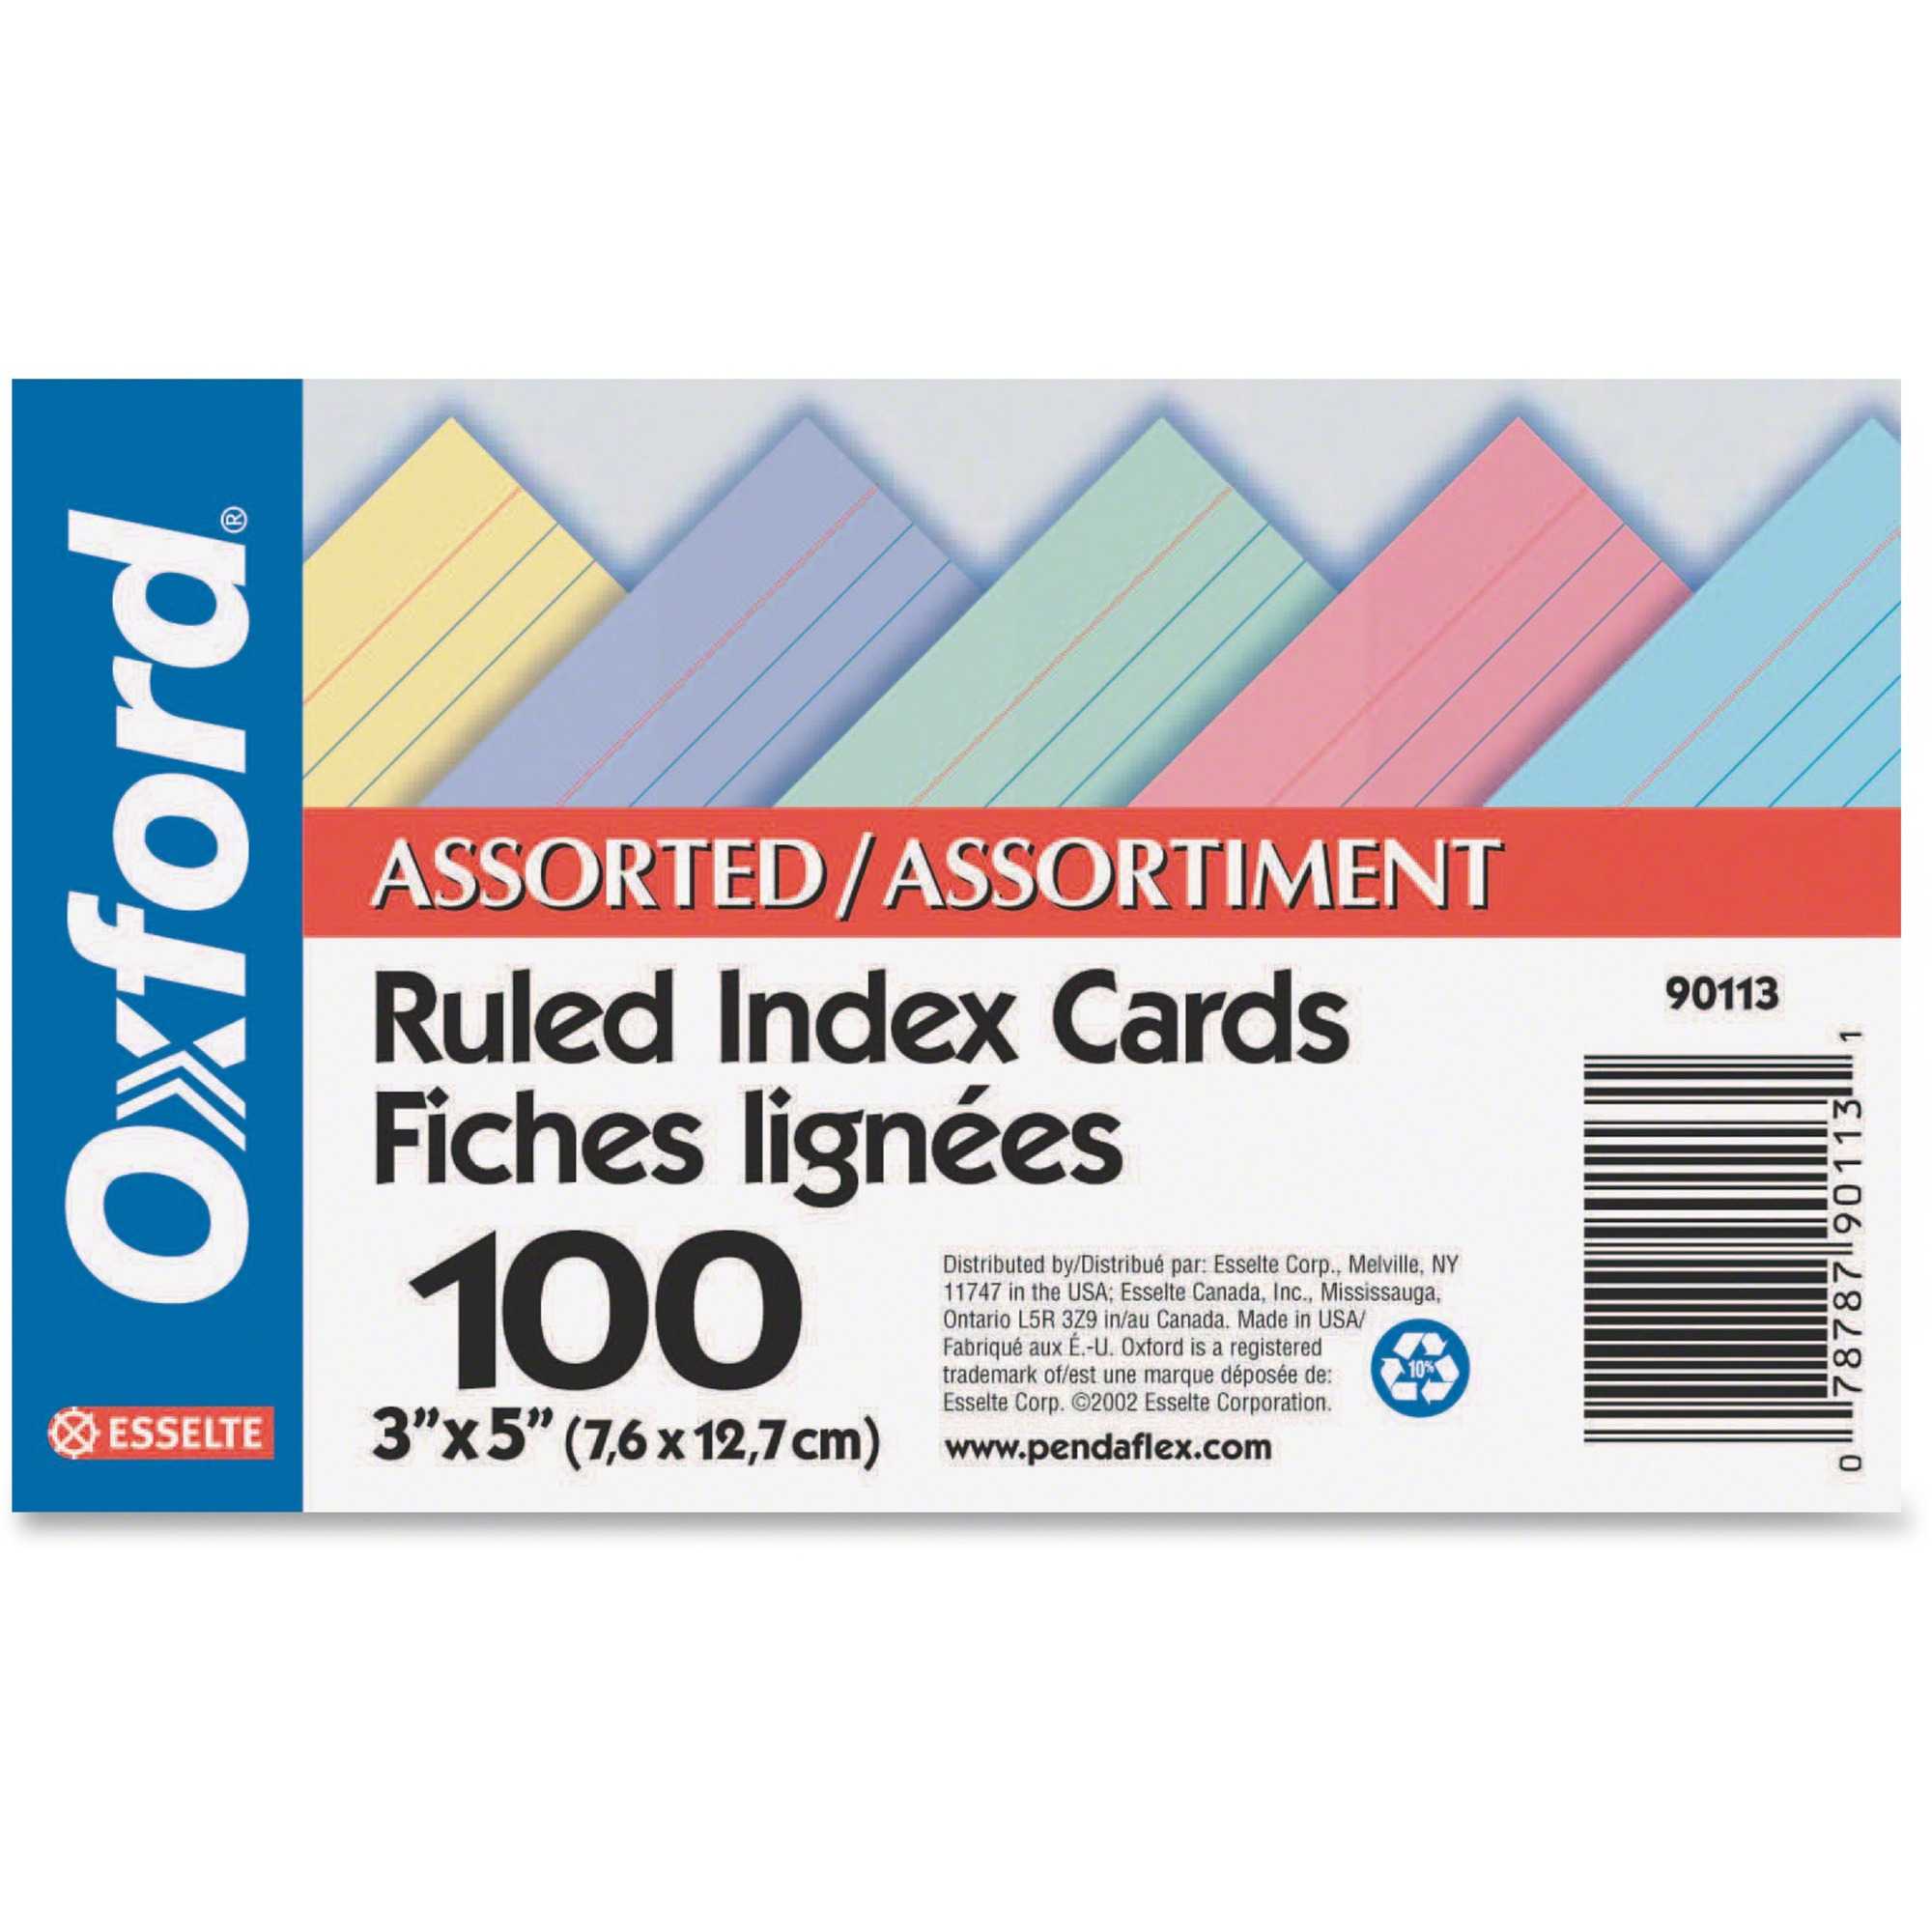 Ocean Stationery And Office Supplies :: Office Supplies Intended For 3 By 5 Index Card Template